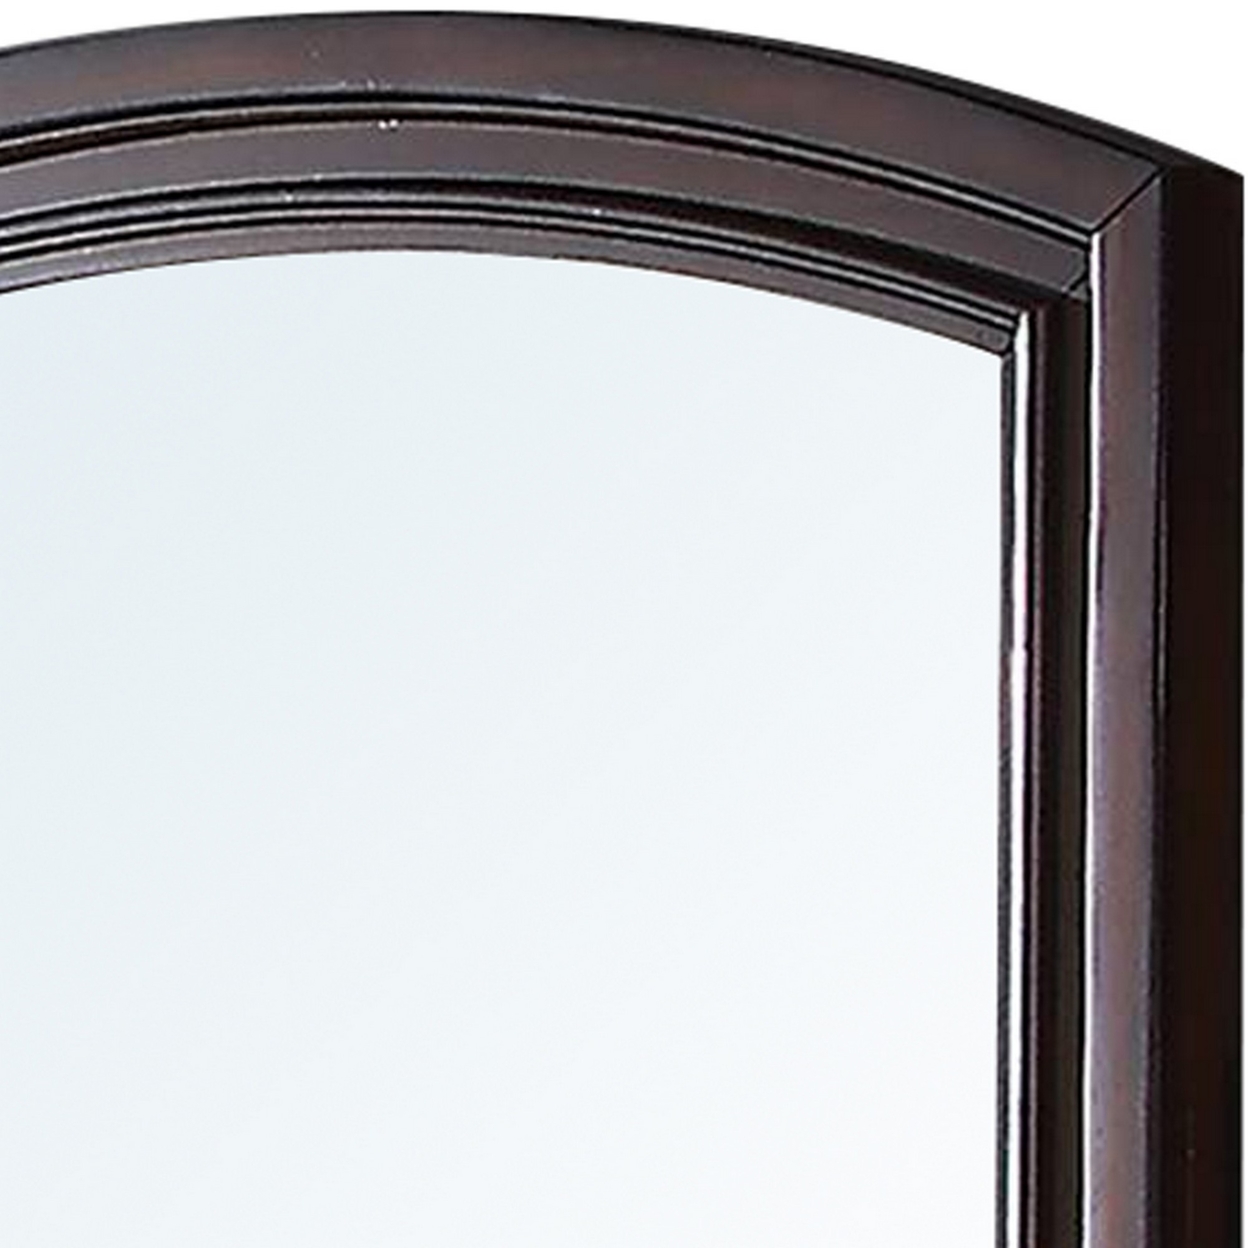 Wooden Mirror With Raised Frame And Molded Details, Brown- Saltoro Sherpi